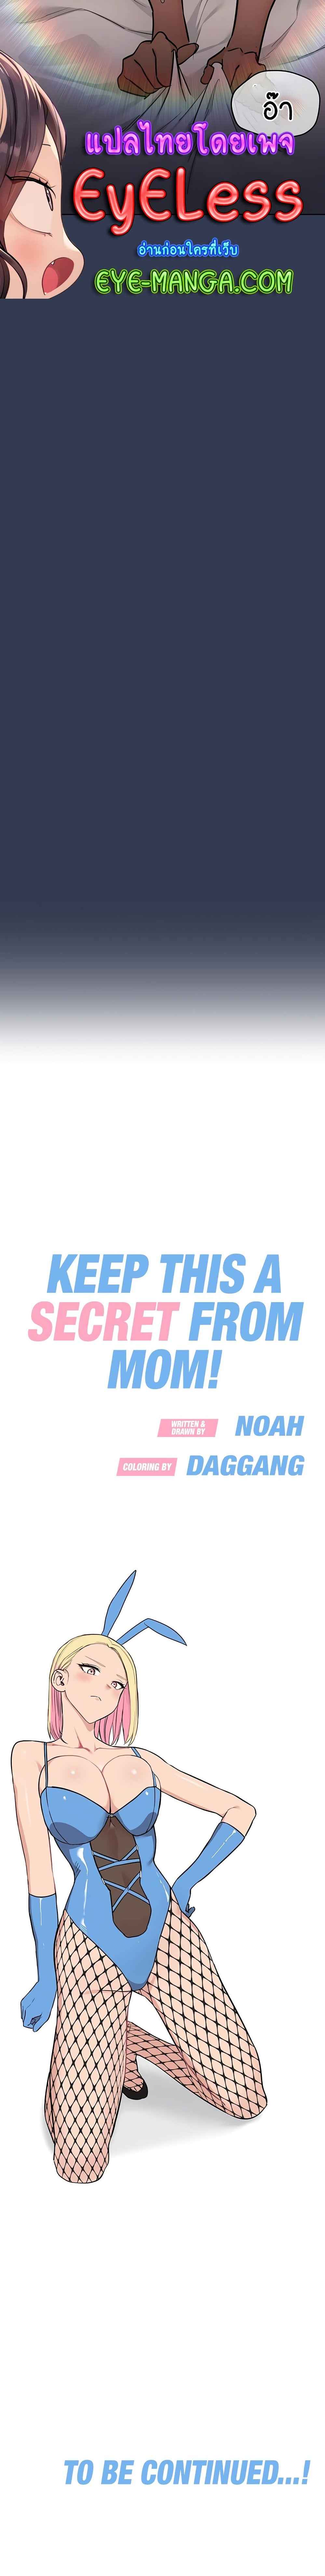 Keep it a secret from your mother10